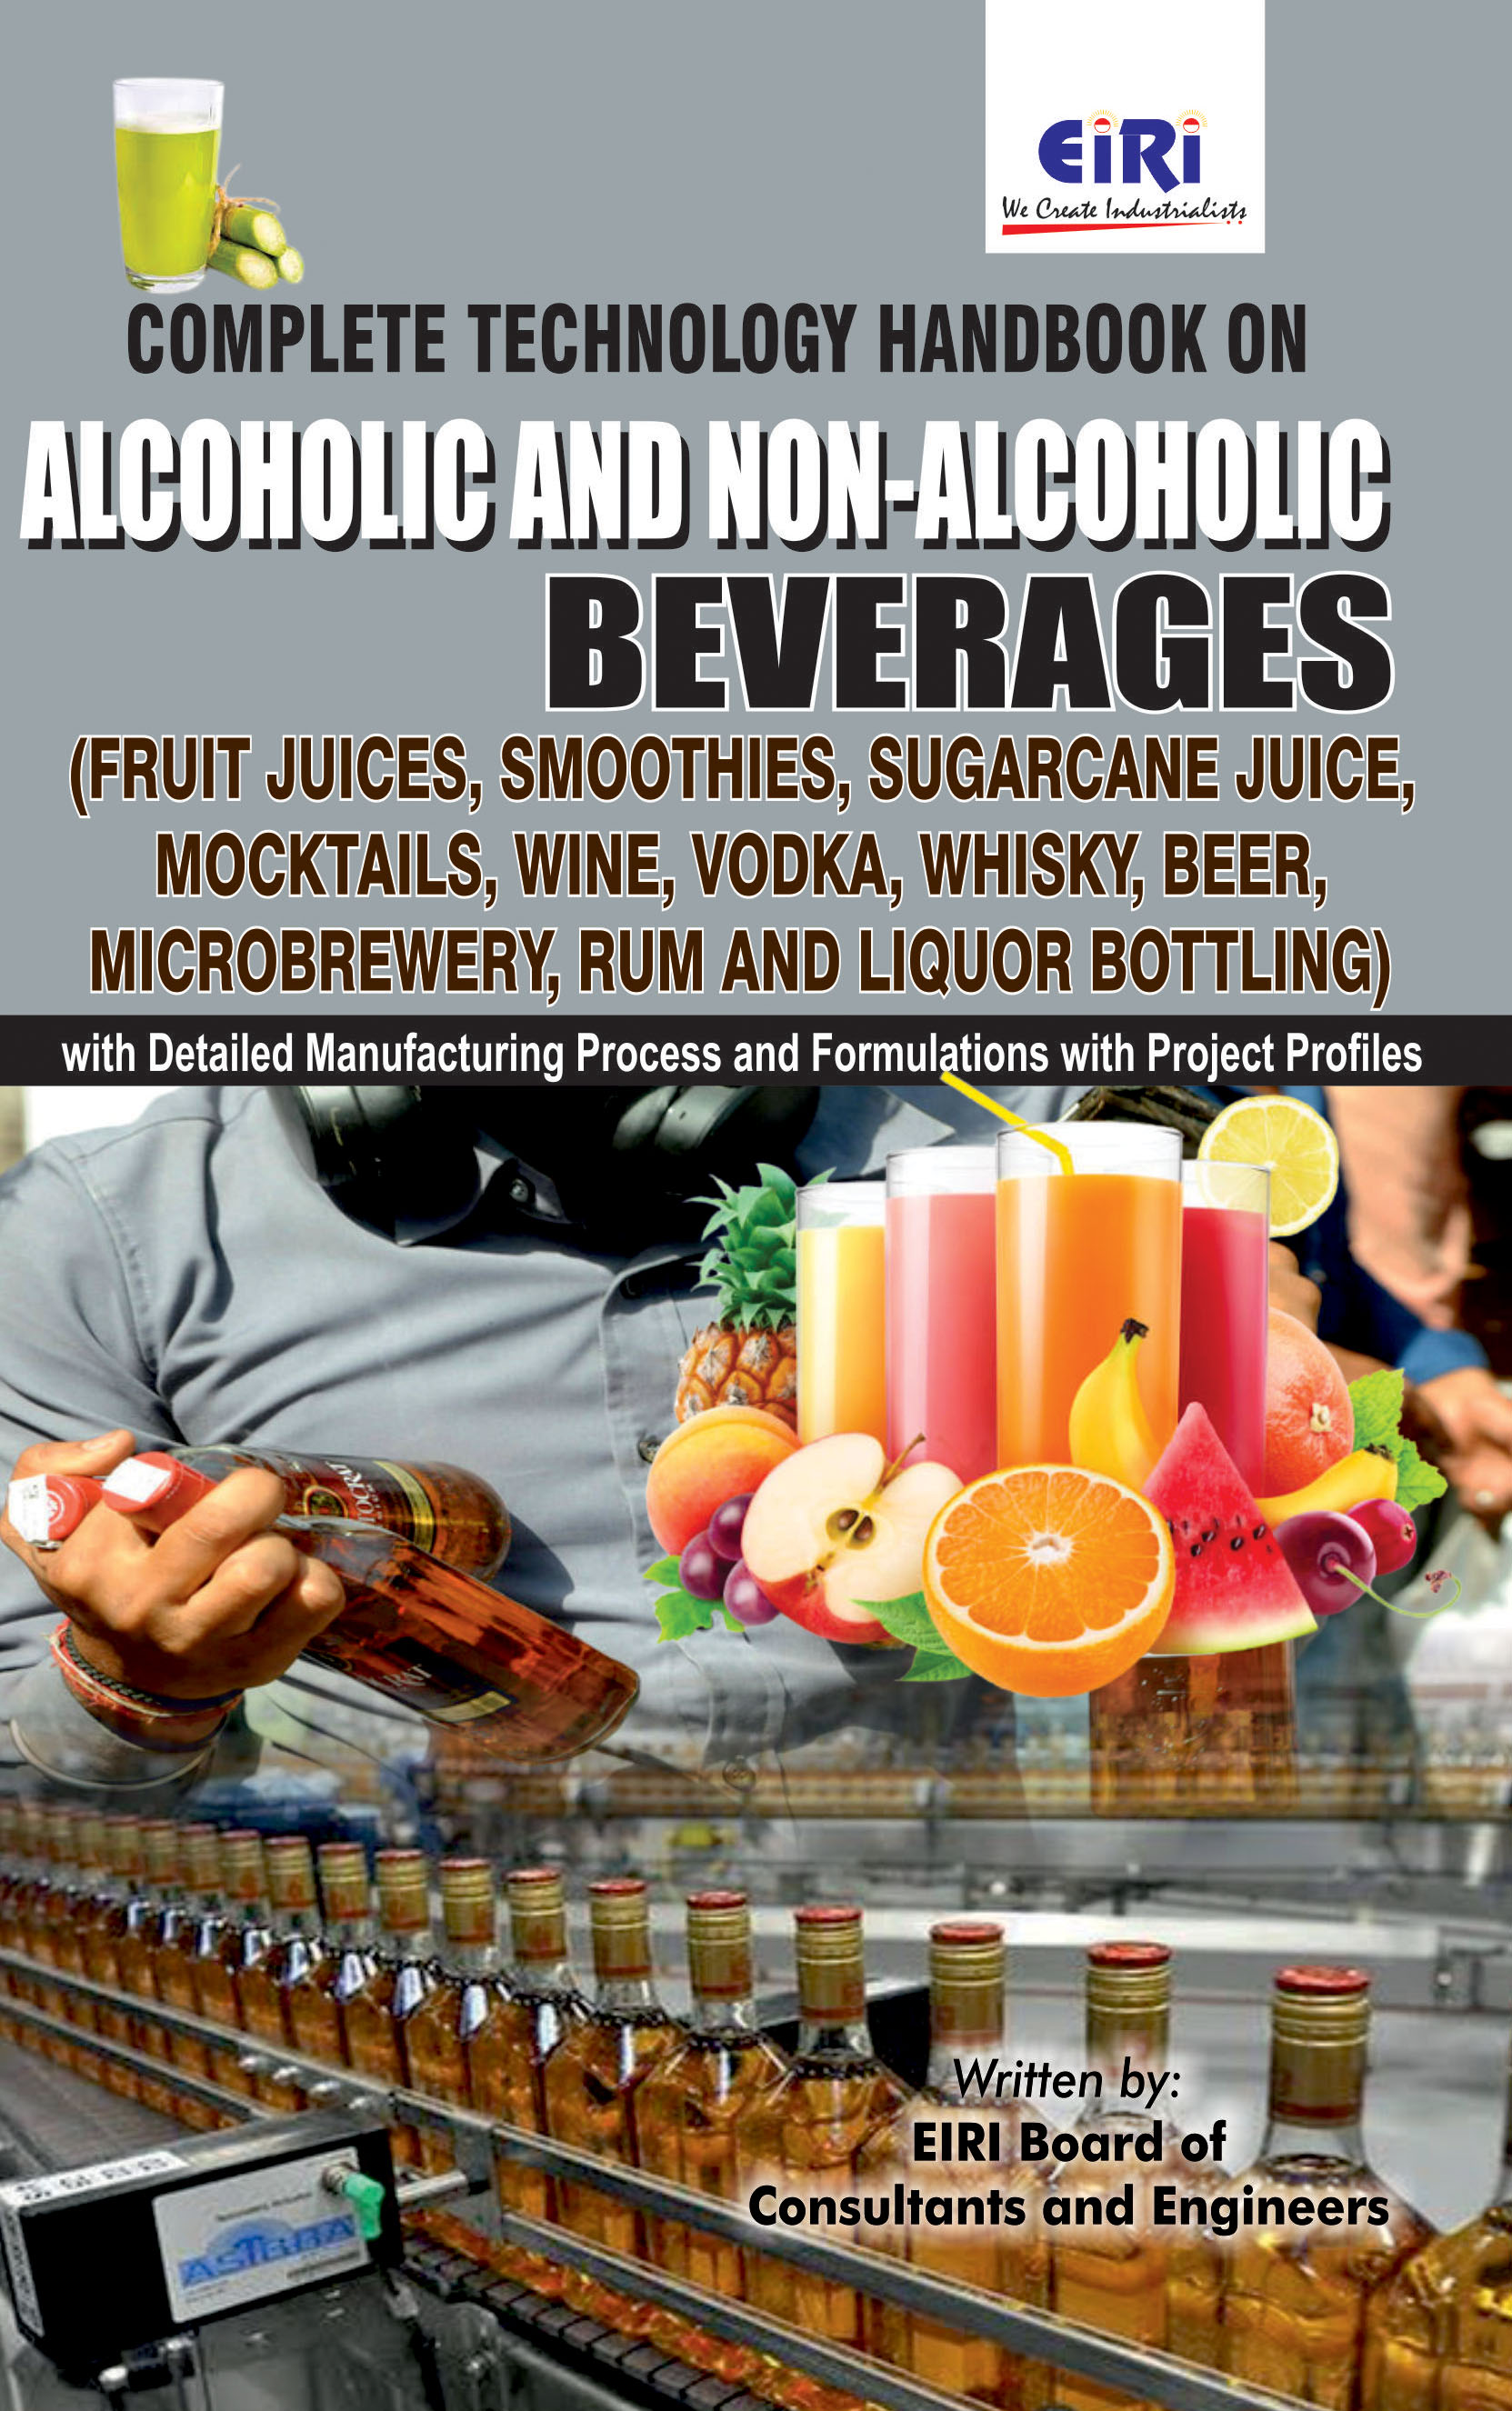 Complete Technology Handbook on Alcoholic and Non-Alcoholic Beverages (Fruit Juices, Smoothies, Sugar- cane Juice, Mocktails, Wine, Rum and Liquor Bottling) with Detailed Manufacturing Process and Formulations with Project Profiles